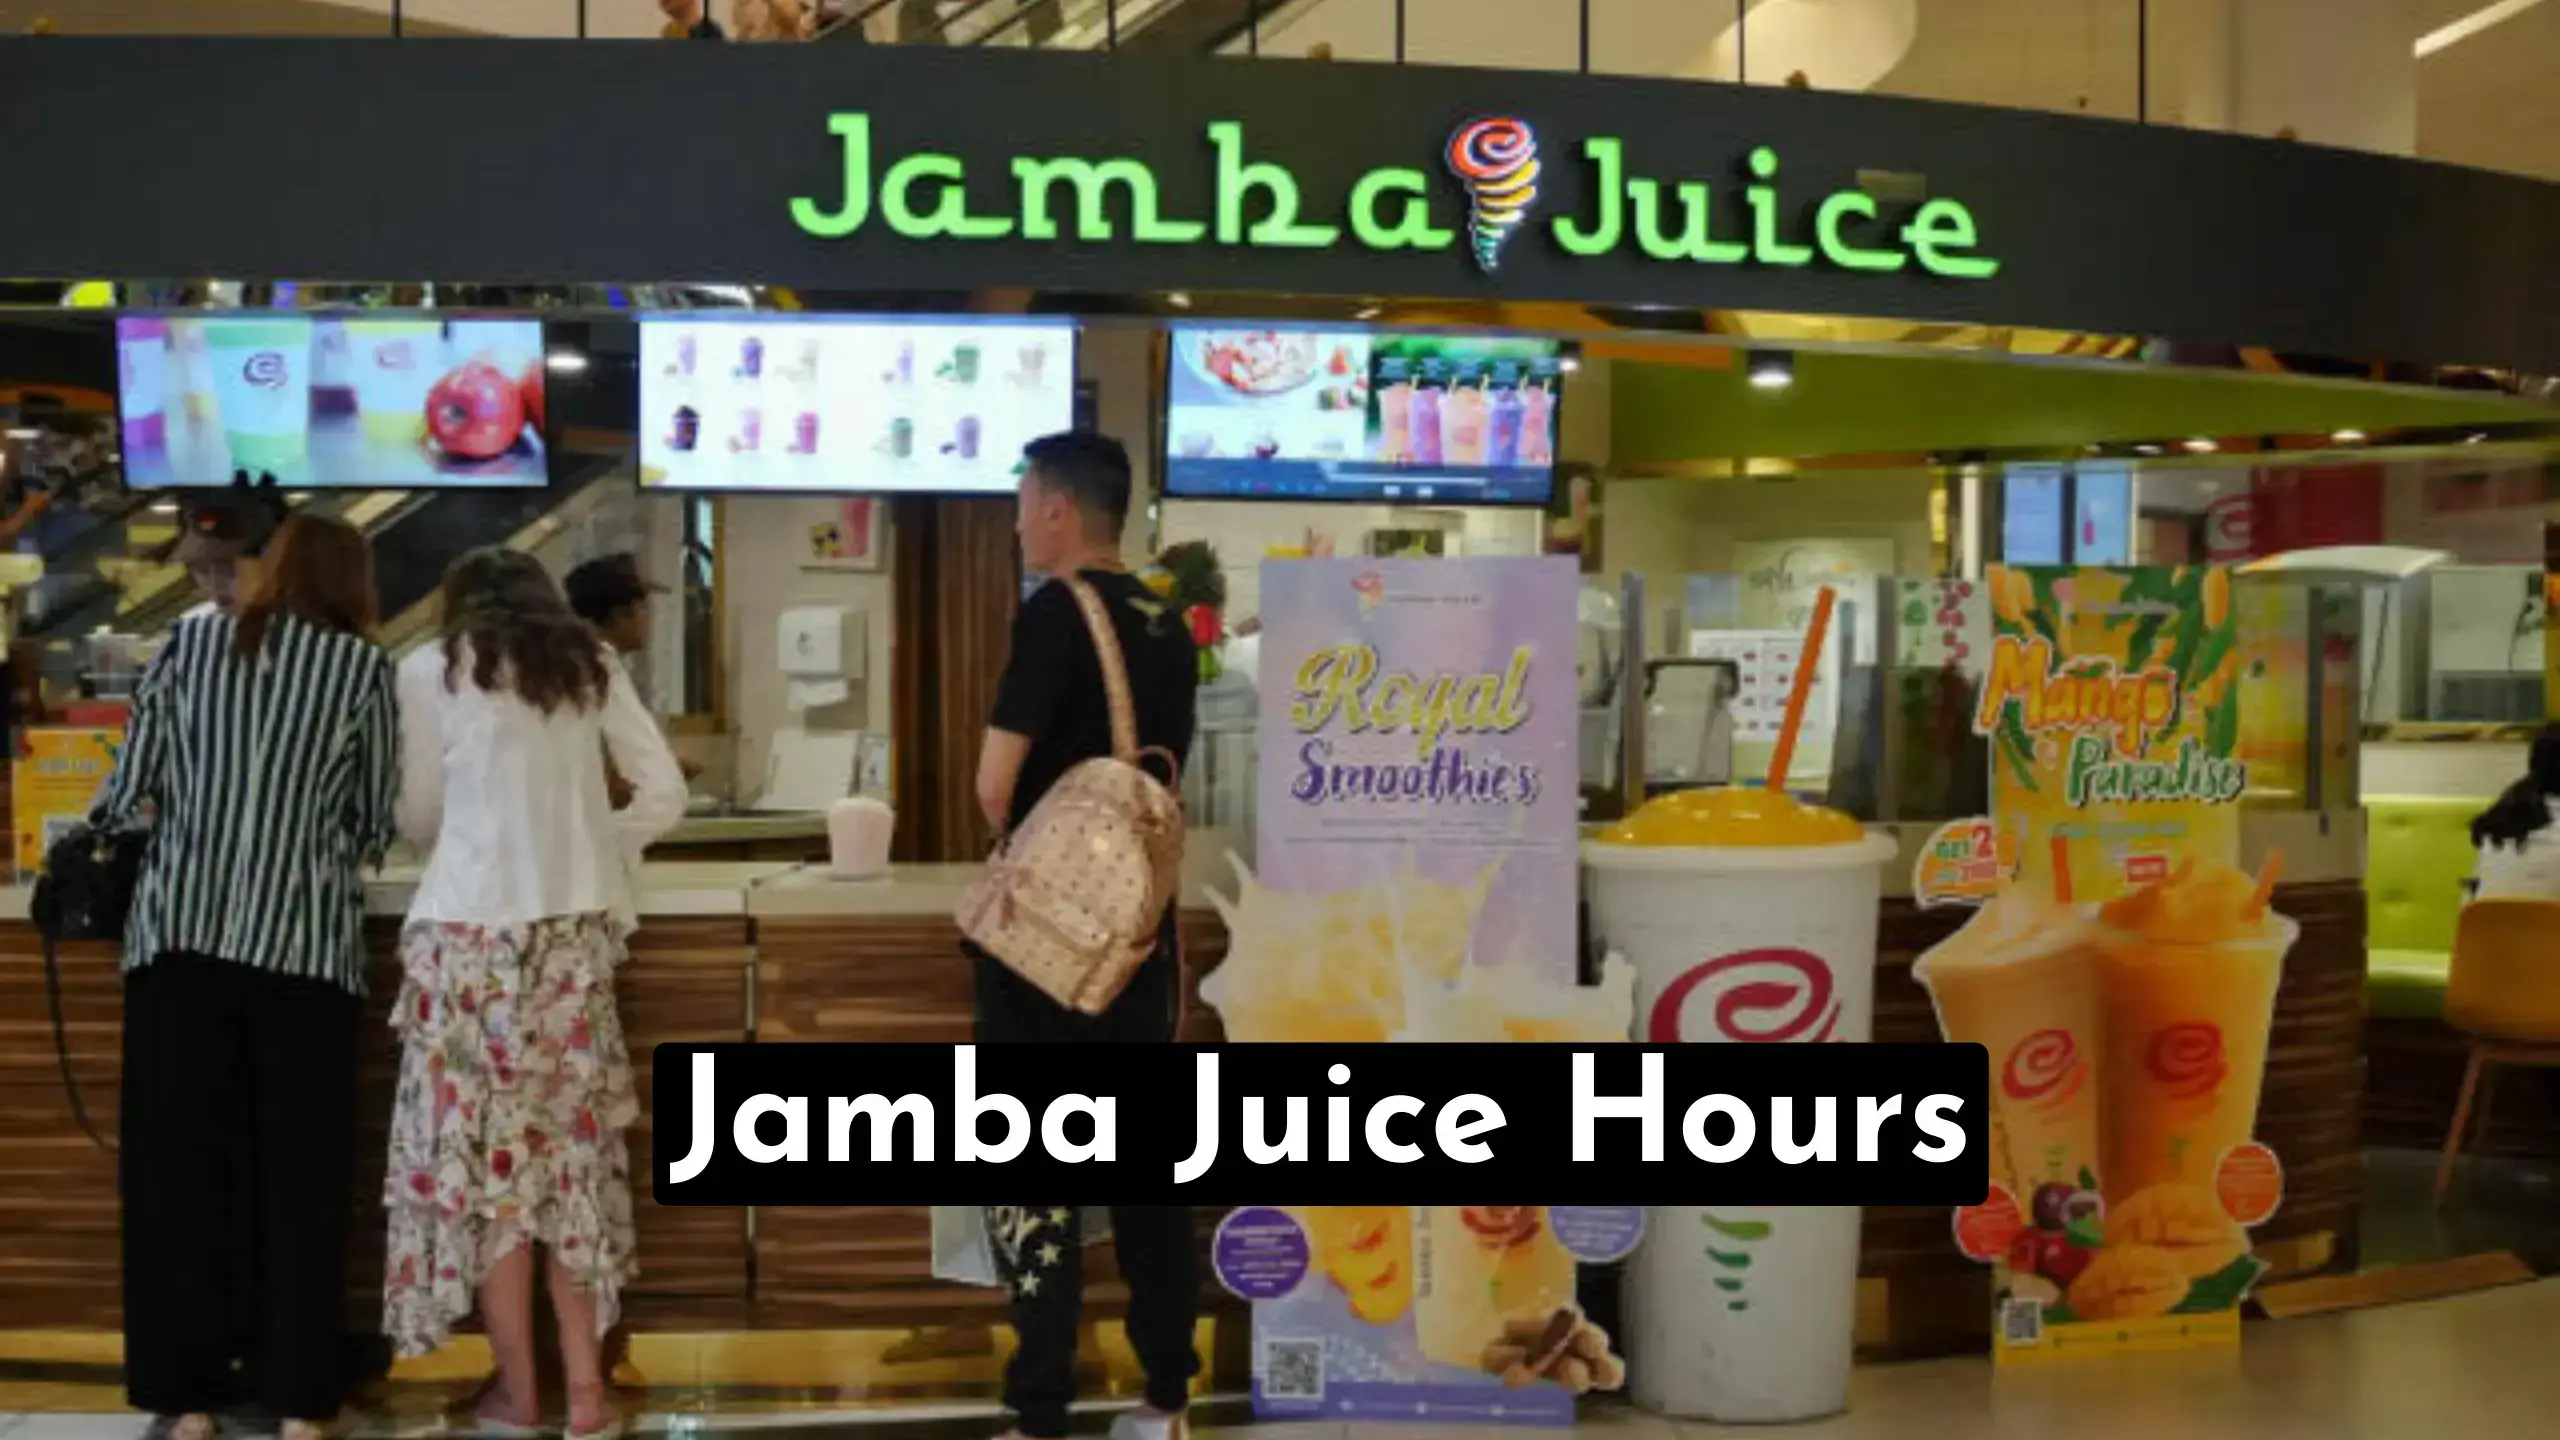 A Quick Guide To Find Jamba Juice Hours & Timings | Also Quickly Locate Jamba Juice Near Me Locations With Top Recommendation For Menu Drinks.